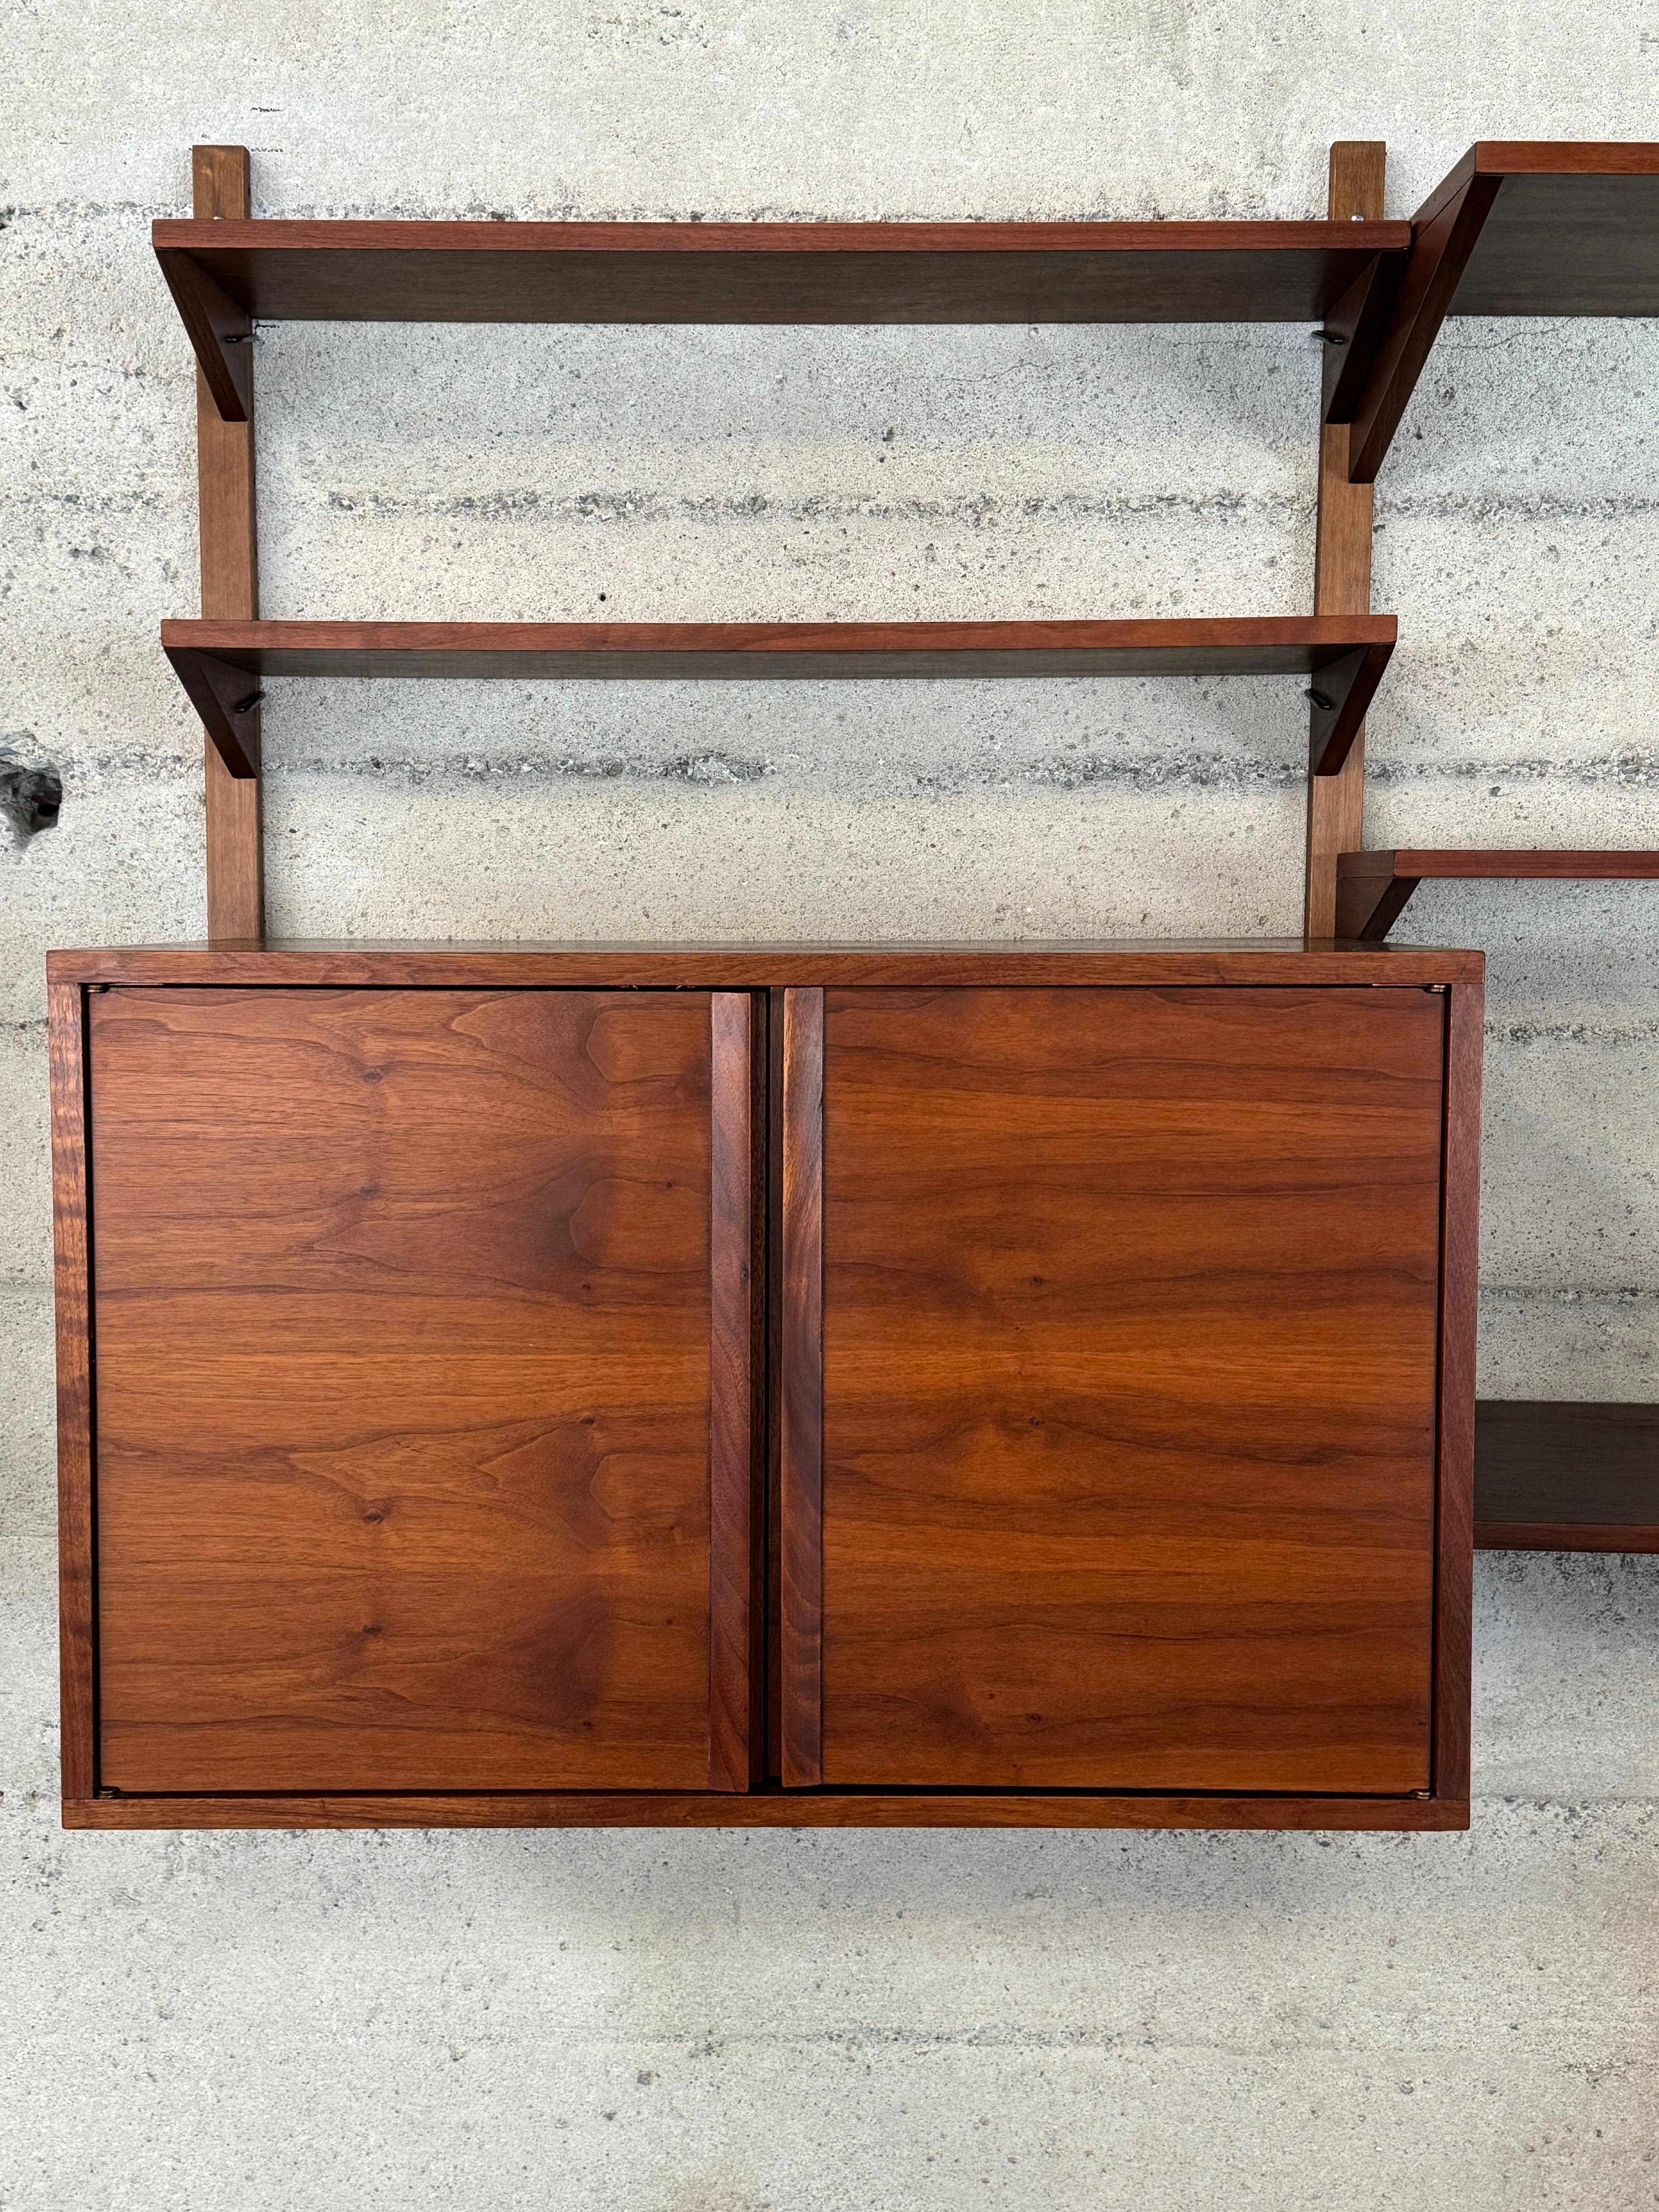 1960s wall unit with two storage cabinets with an adjustable shelf, five adjustable shelves and the sixth that can be used as a desk with a cutout for a power cord. Richly colored and grained walnut, the shelves and cabinets attach via u shaped